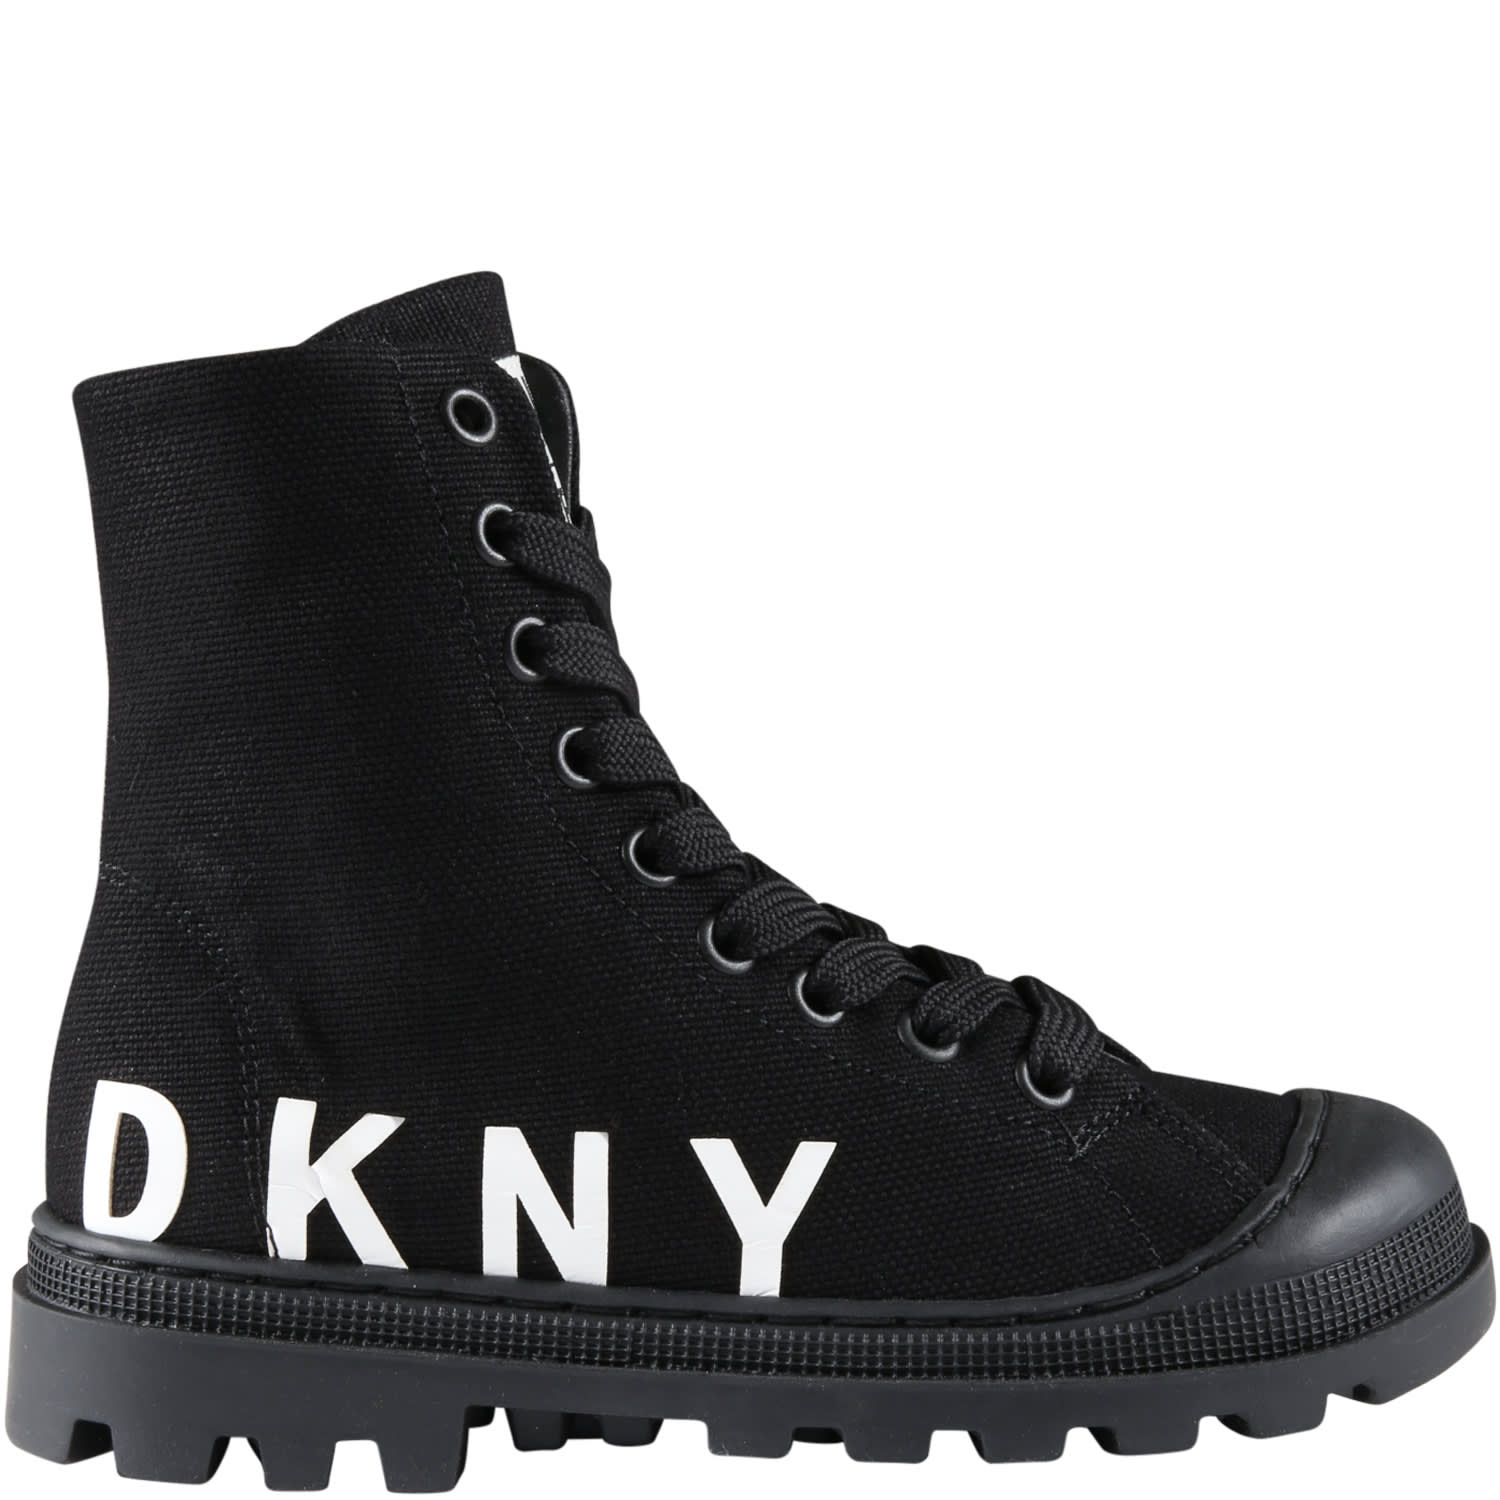 DKNY Black Sneakers For Girl With White Logo